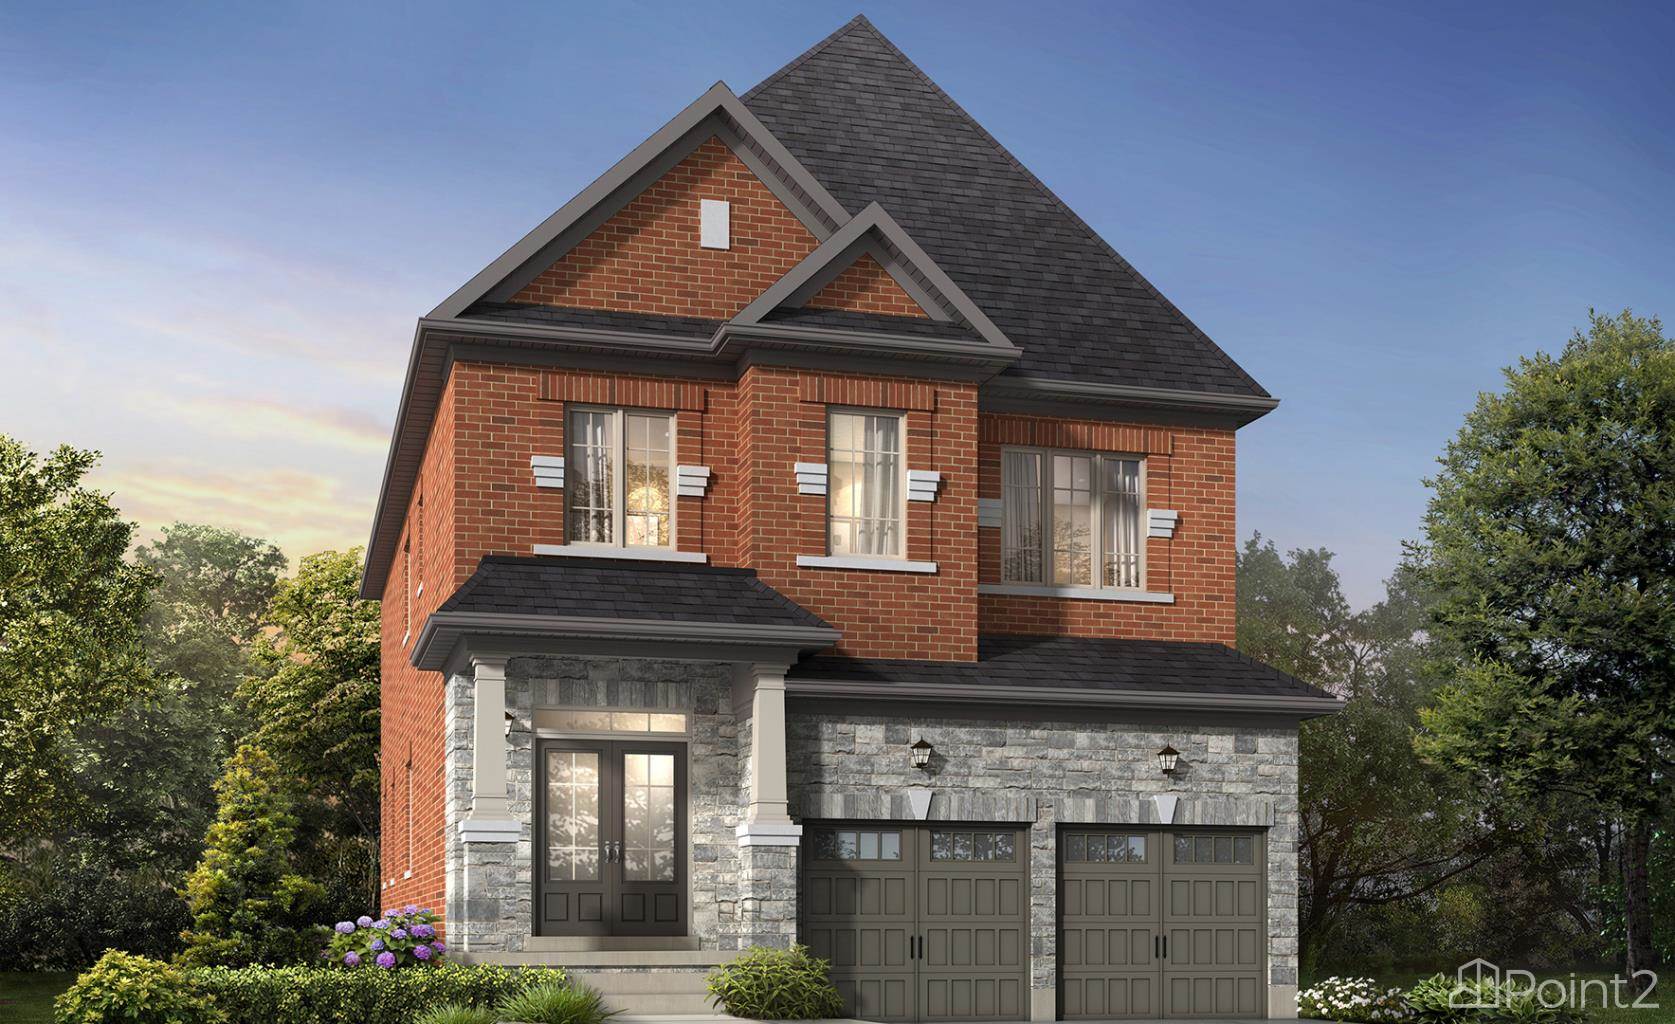 Upper Caledon East Insider Vip Access At Airport Road & Cranston Drive, Kleinburg Station, ON L7C1K2 Photo 3